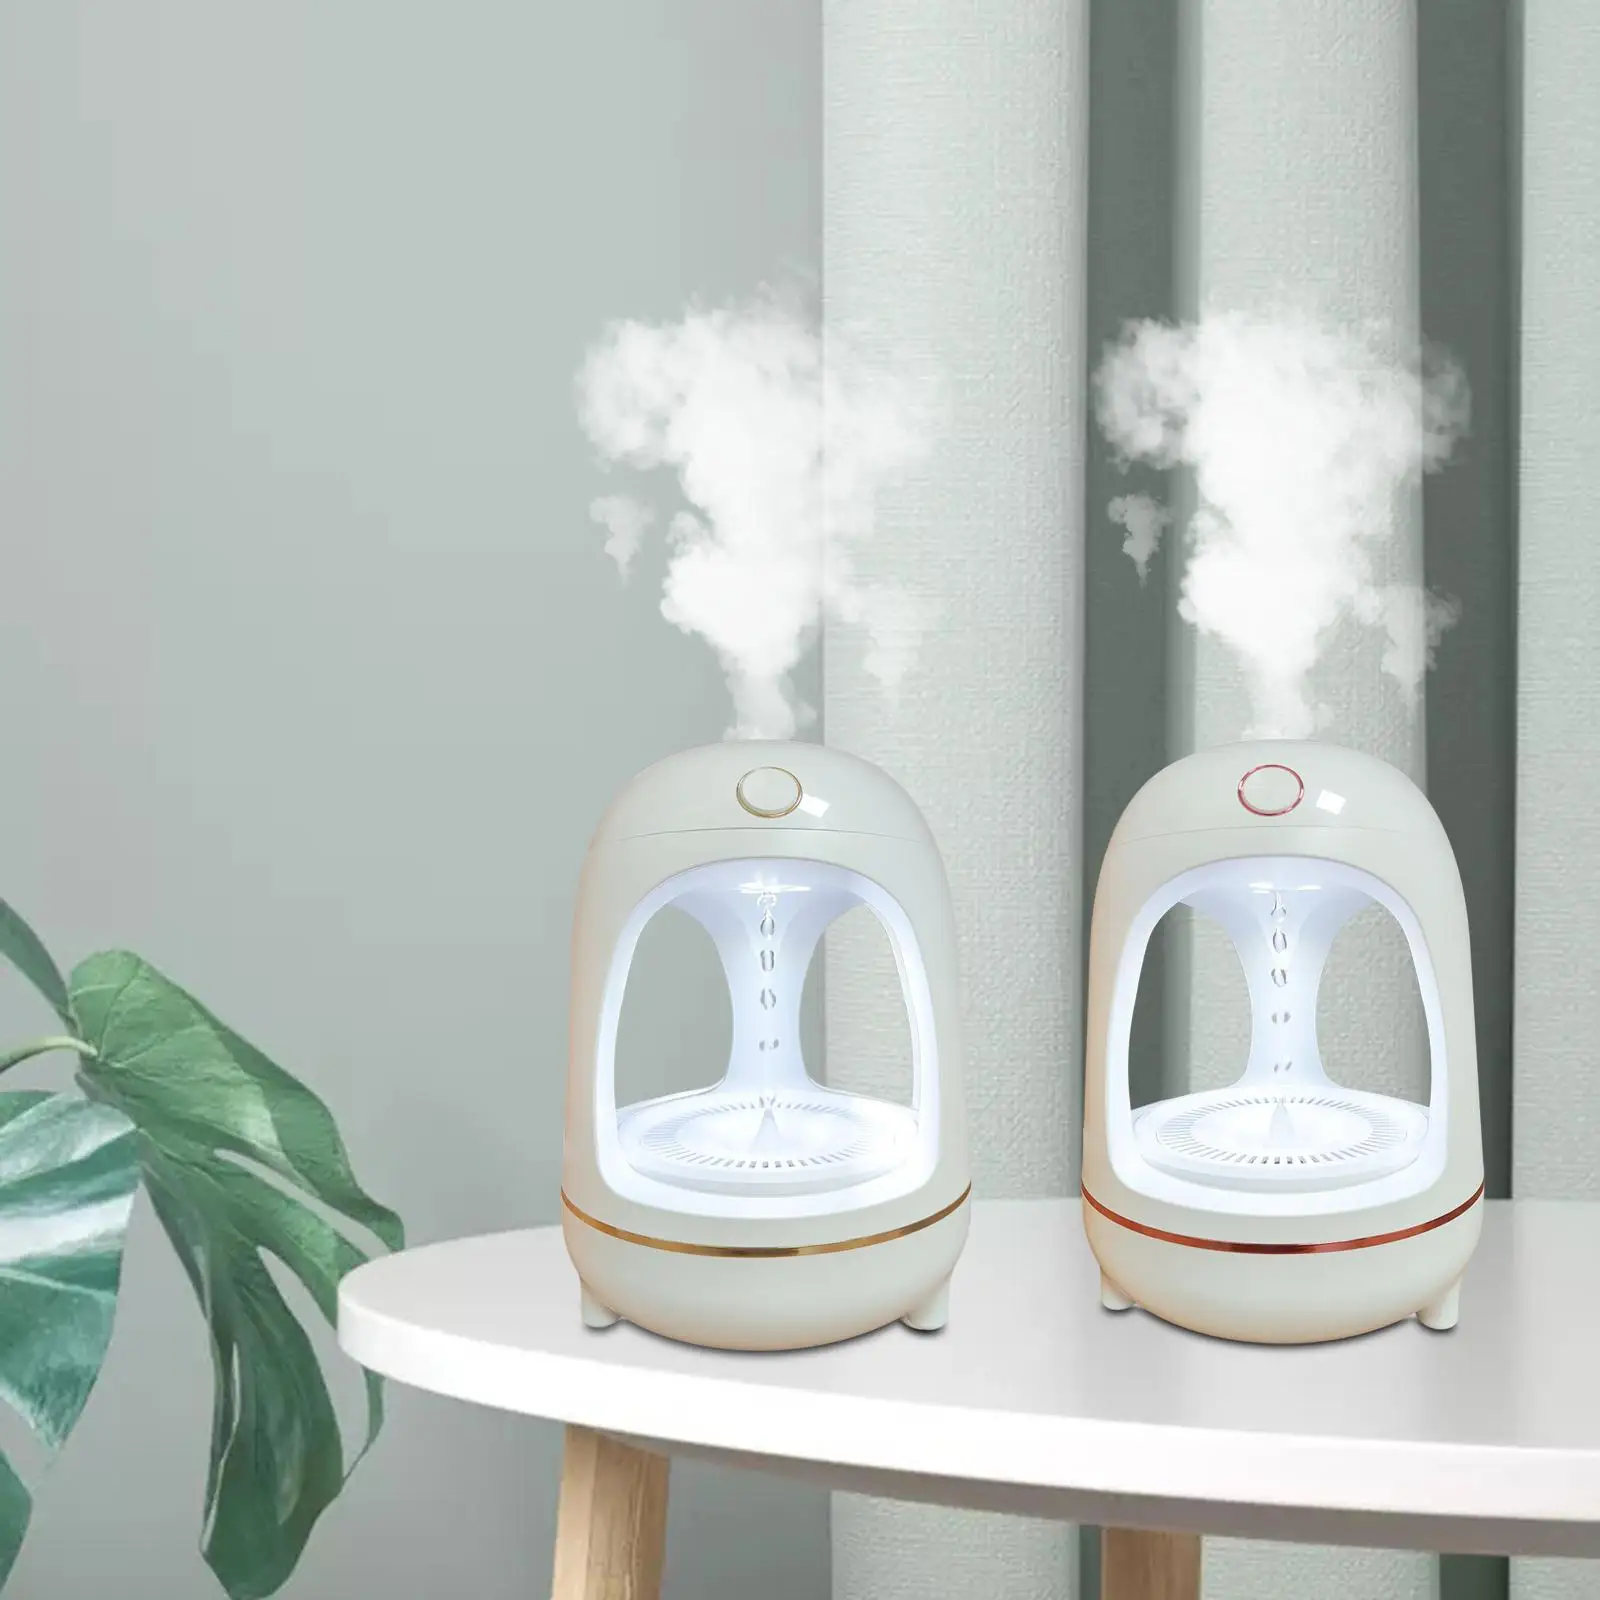 Personal Mist Humidifier Antigravity Water Droplet Countercurrent Large Capacity Large Fog Volume Quiet for Office Bedroom